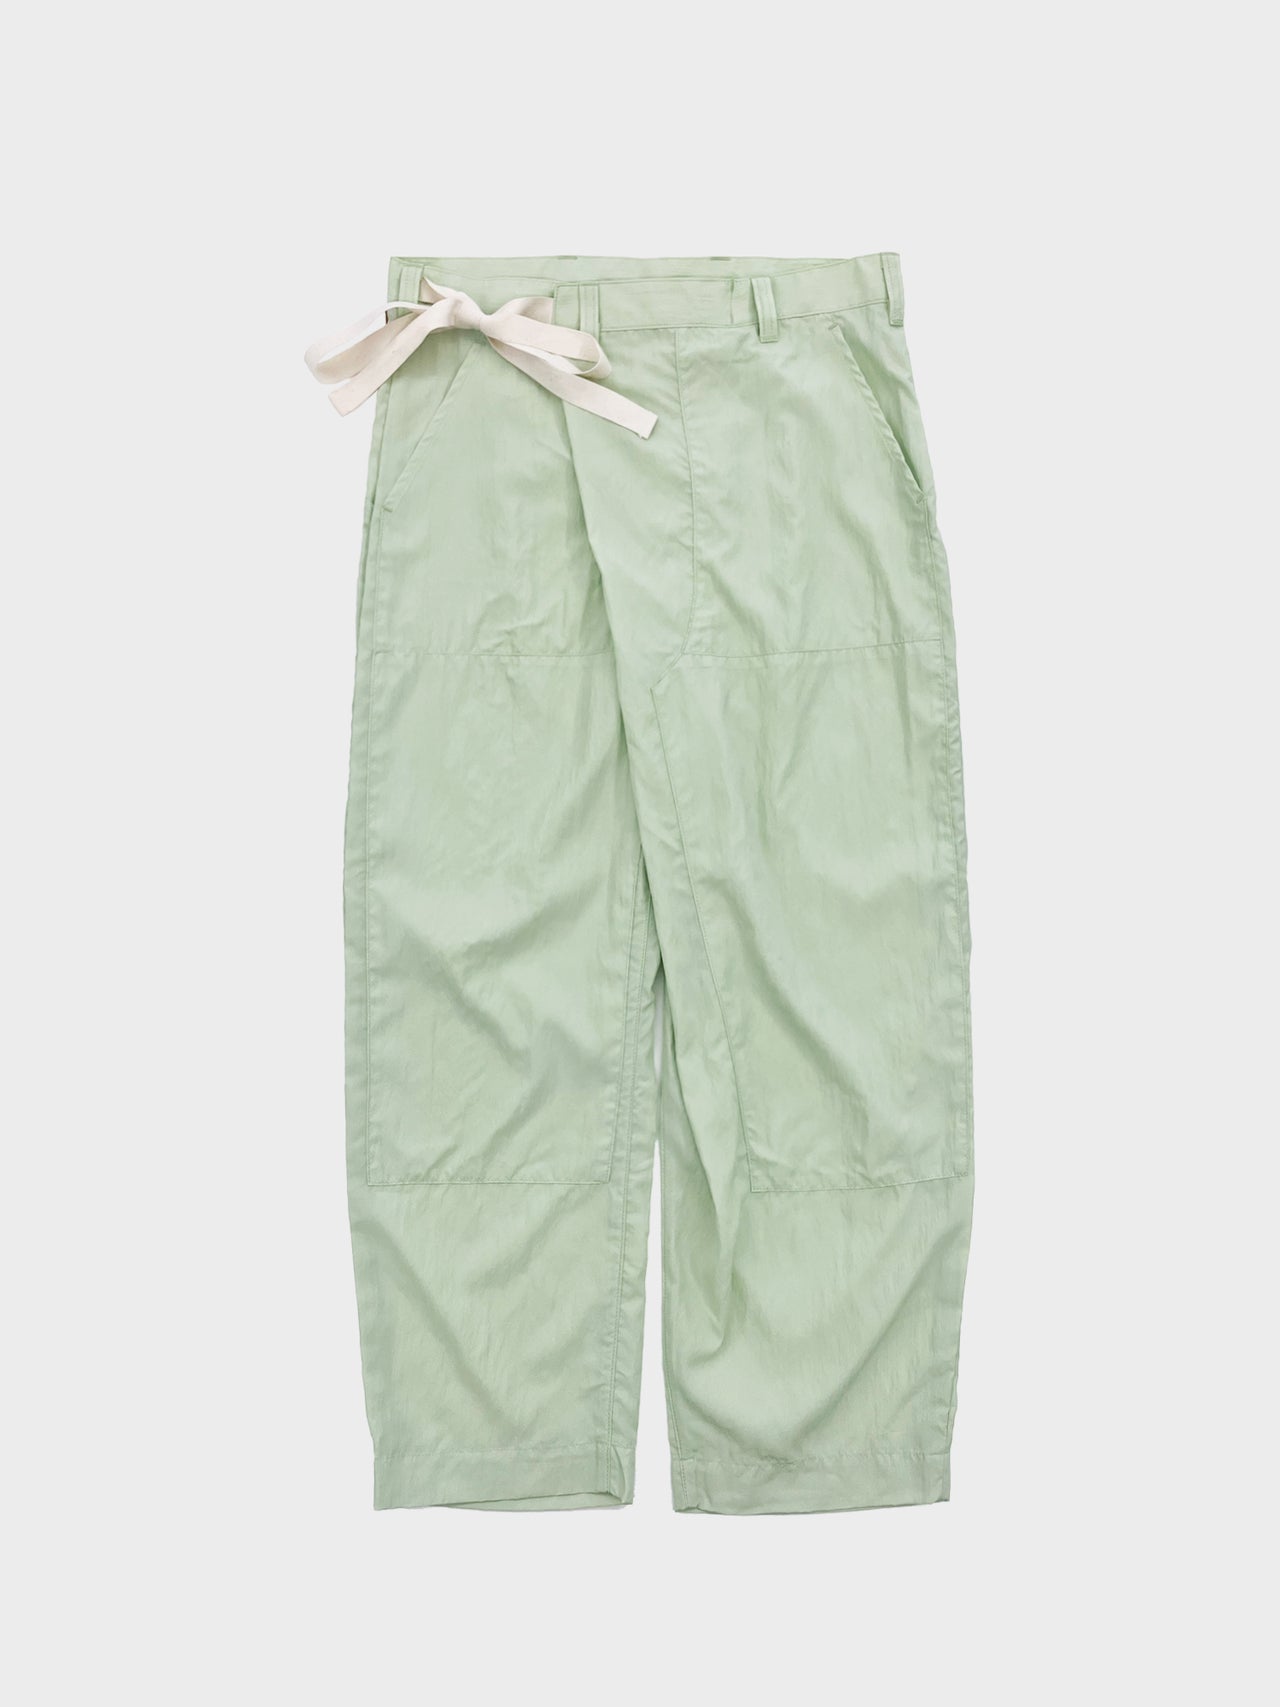 【30%OFF】ASEEDONCLOUD / HW blacksmith trouser (PALE GREEN)